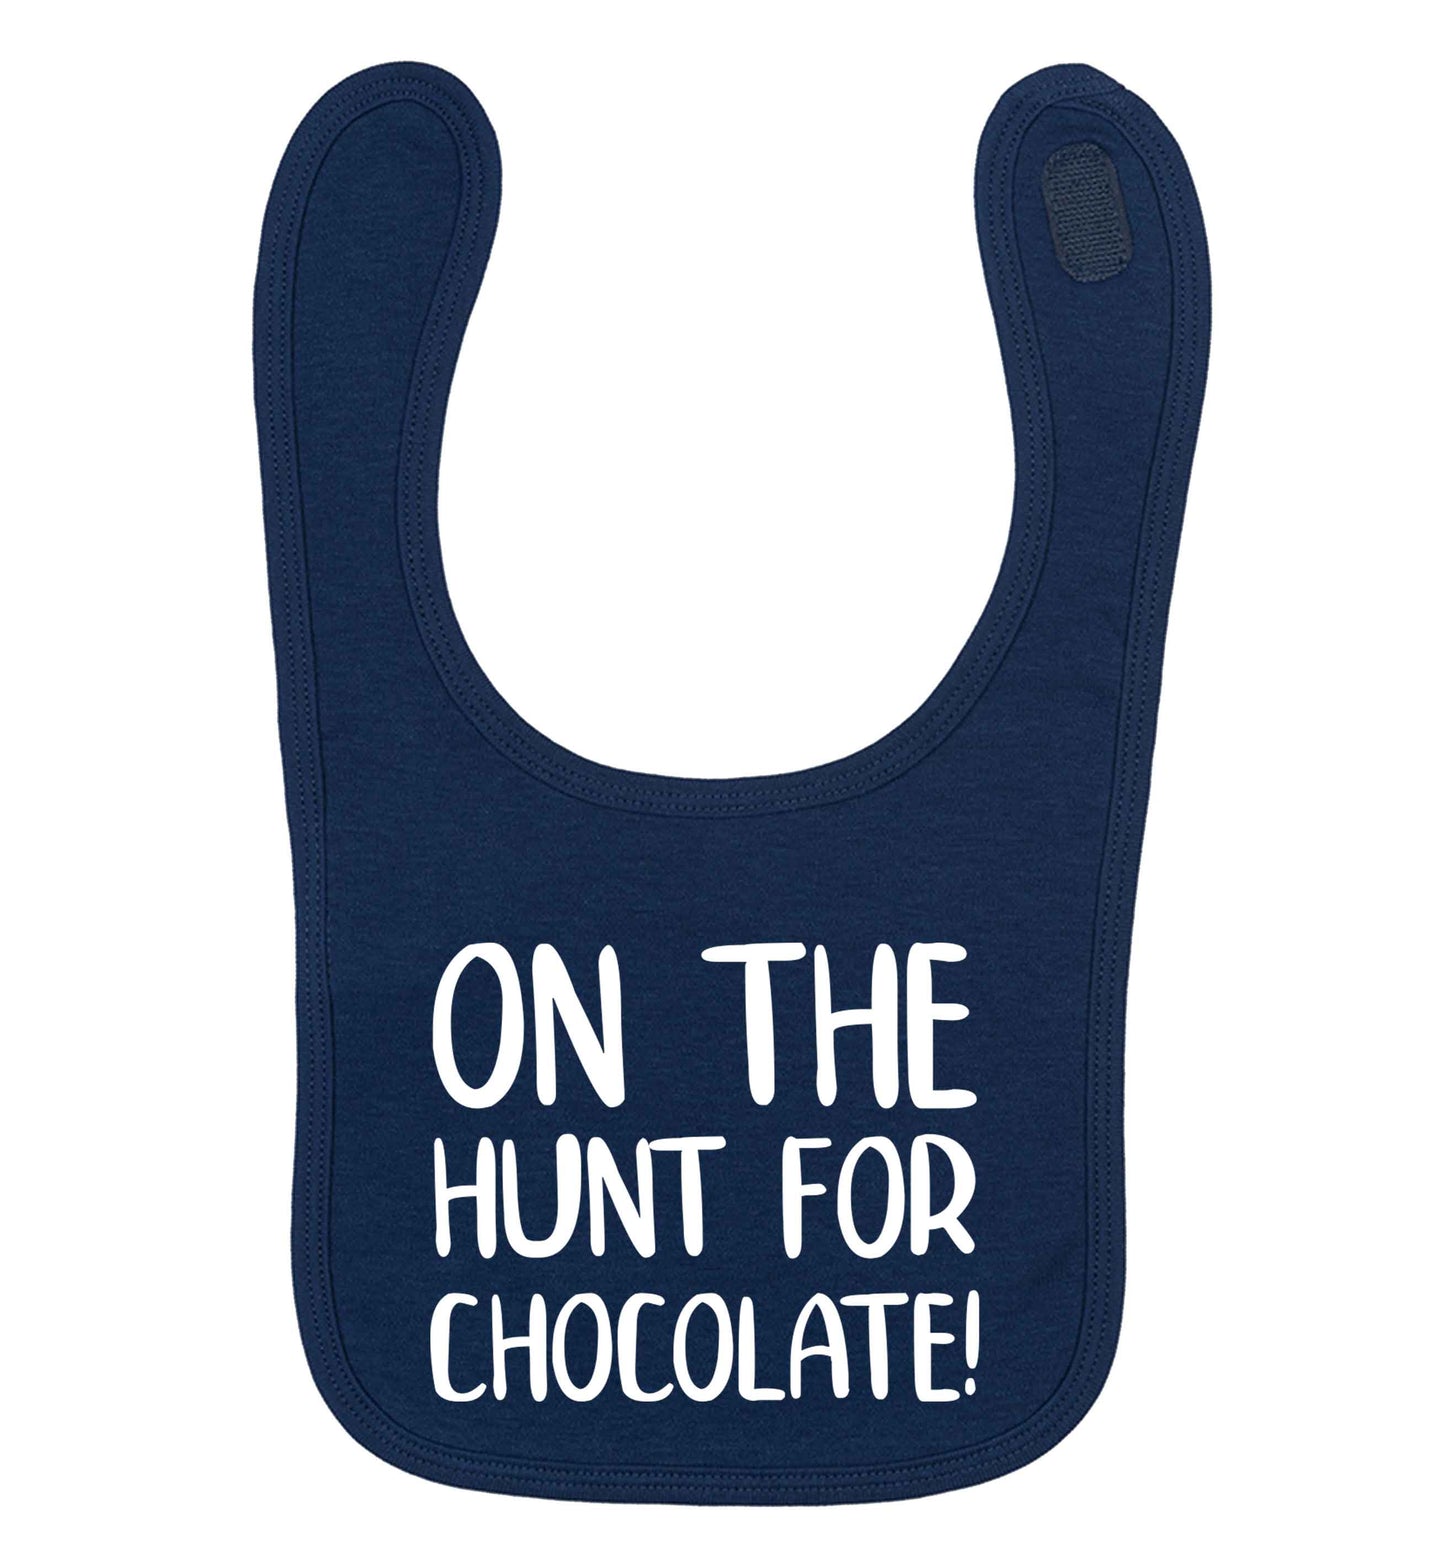 On the hunt for chocolate! navy baby bib